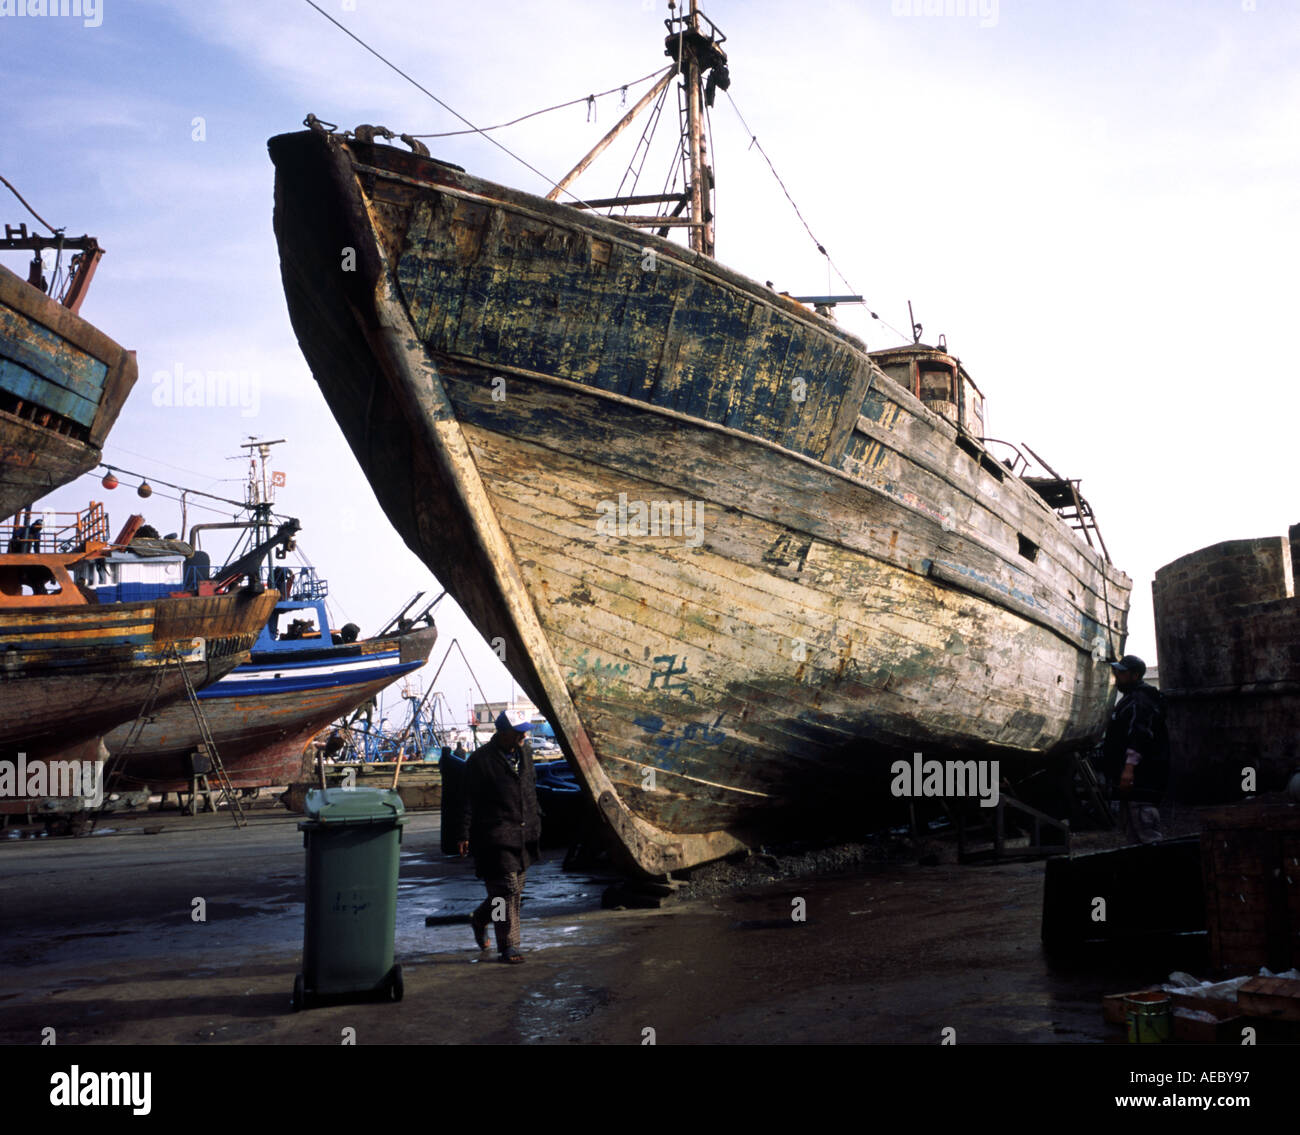 The rotting hull of a trawler is clearly visible in the shipyard of essaouira harbour A swastika has been written on the hull  Stock Photo